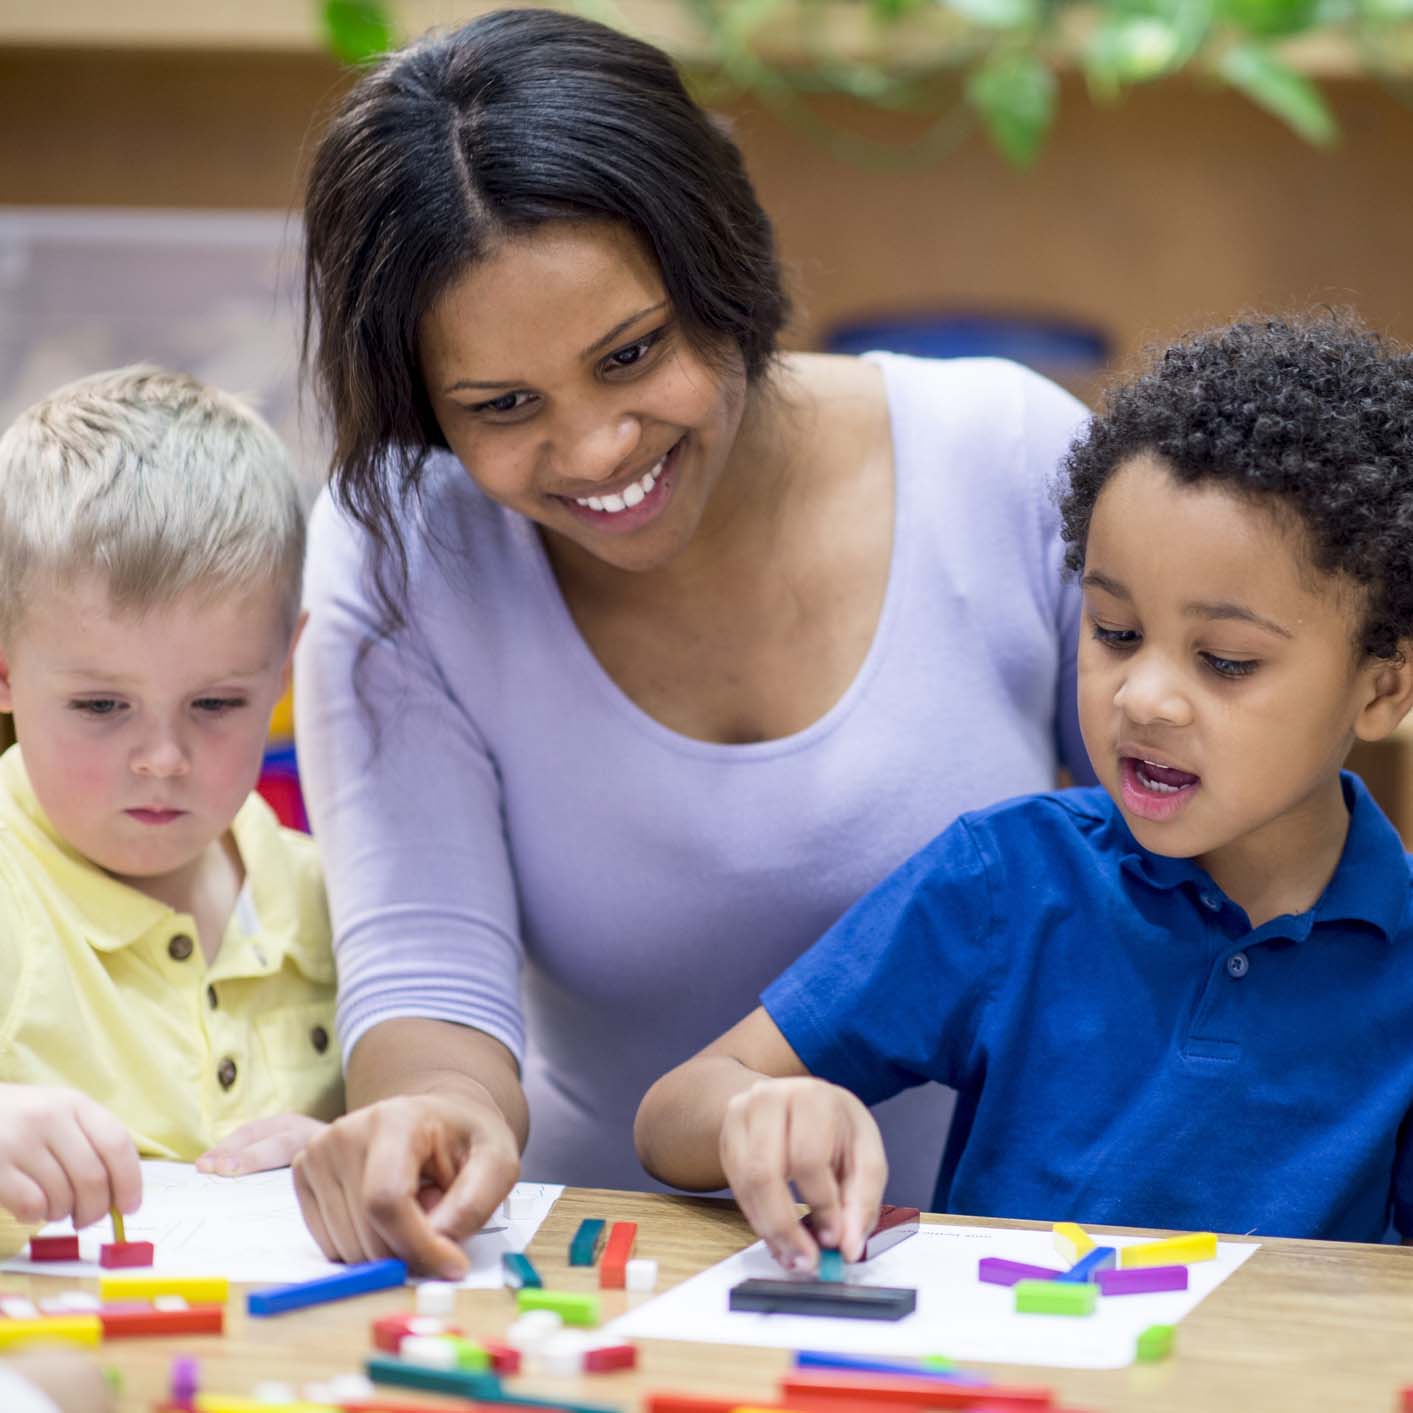 Child daycare helps infants and toddlers develop educational skills to increase their success in school.